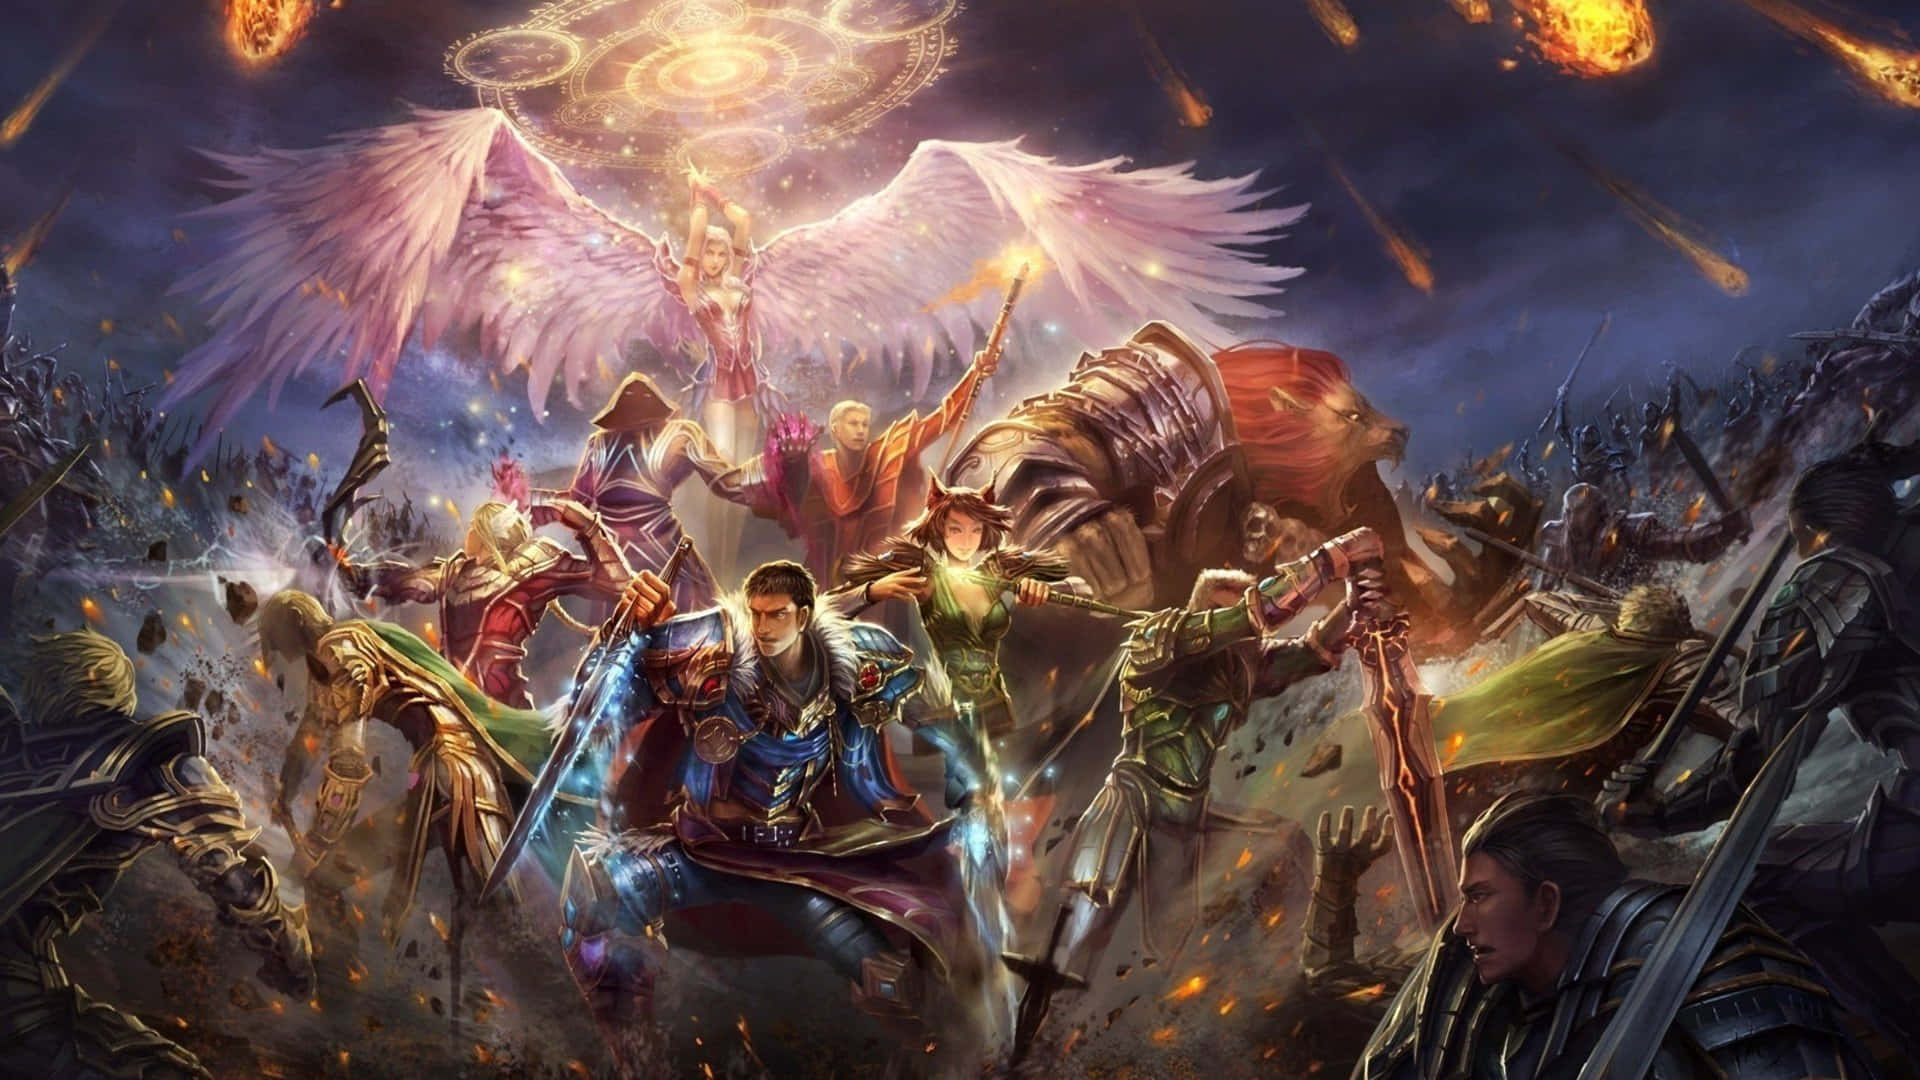 A Group Of People With A Sword And Angels Wallpaper